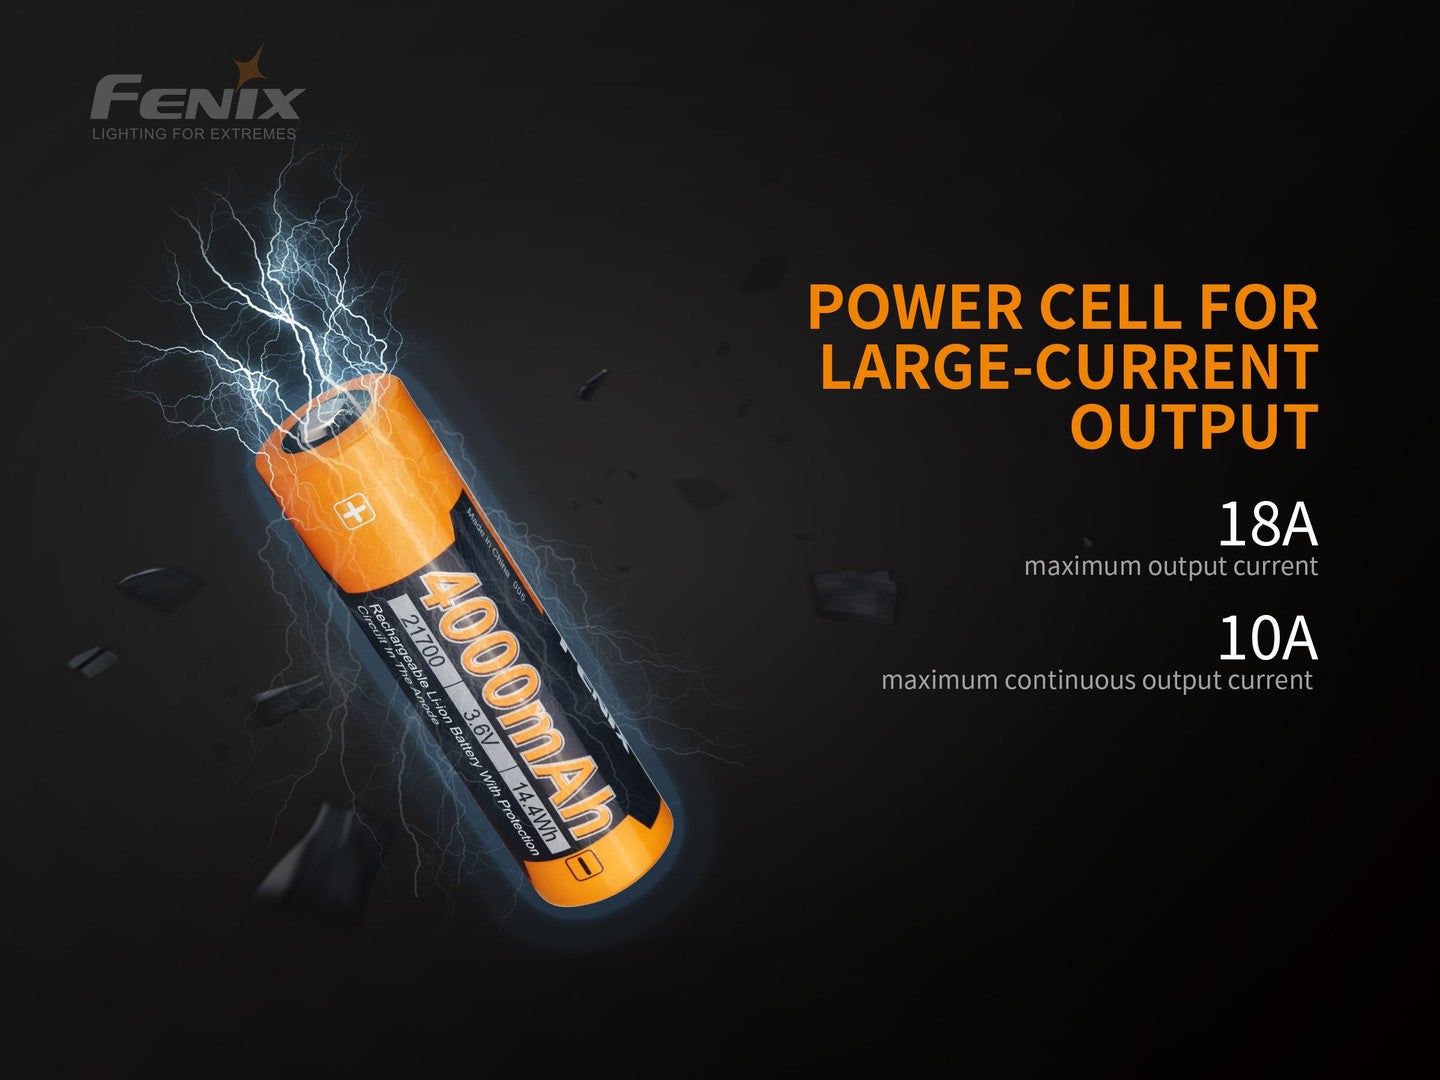 Fenix ARB-L21-4000P 21700 Rechargeable Battery - Protected High-Drain Li-ion Button Top Battery